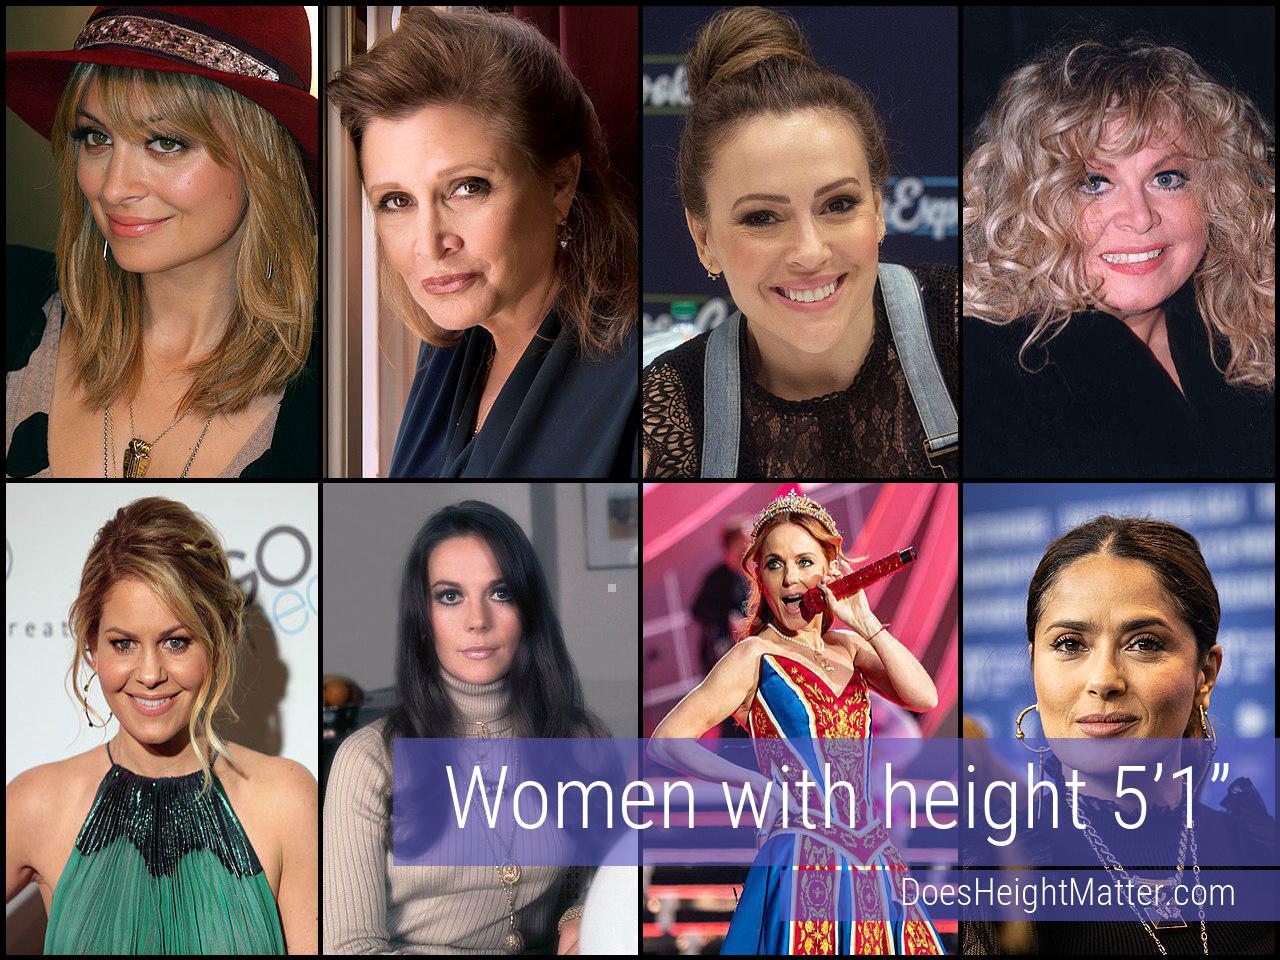 Female celebrities who are 5'1